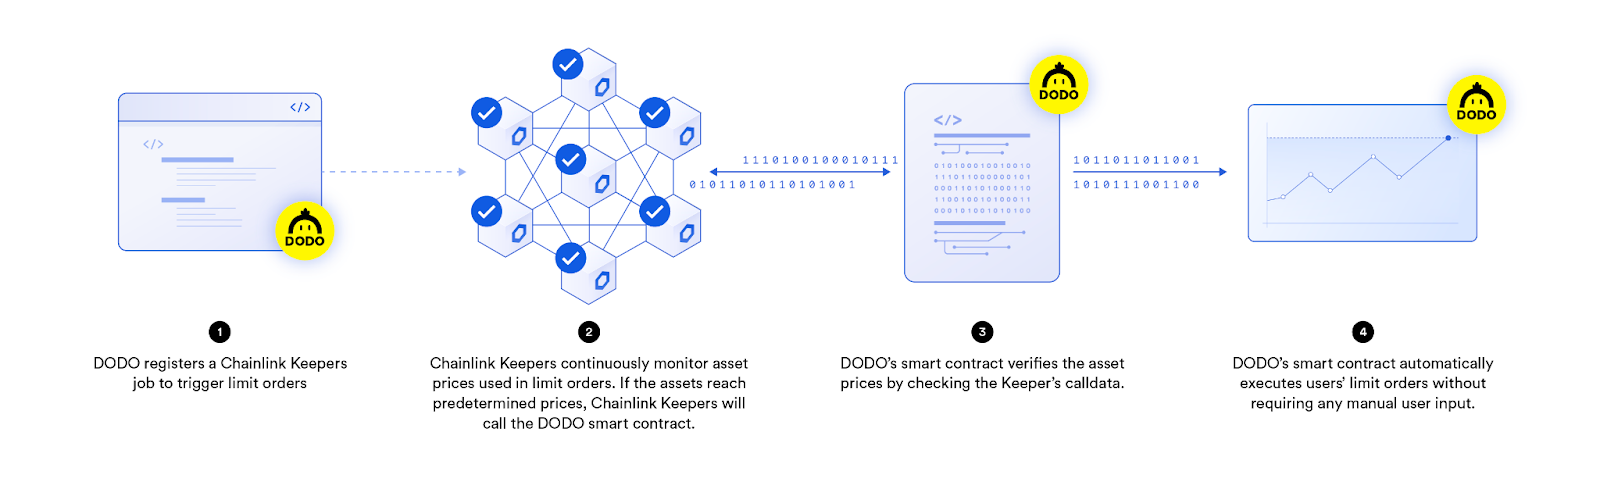 A diagram showing how DODO is integrating Chainlink Keepers for automated limit order functionality.